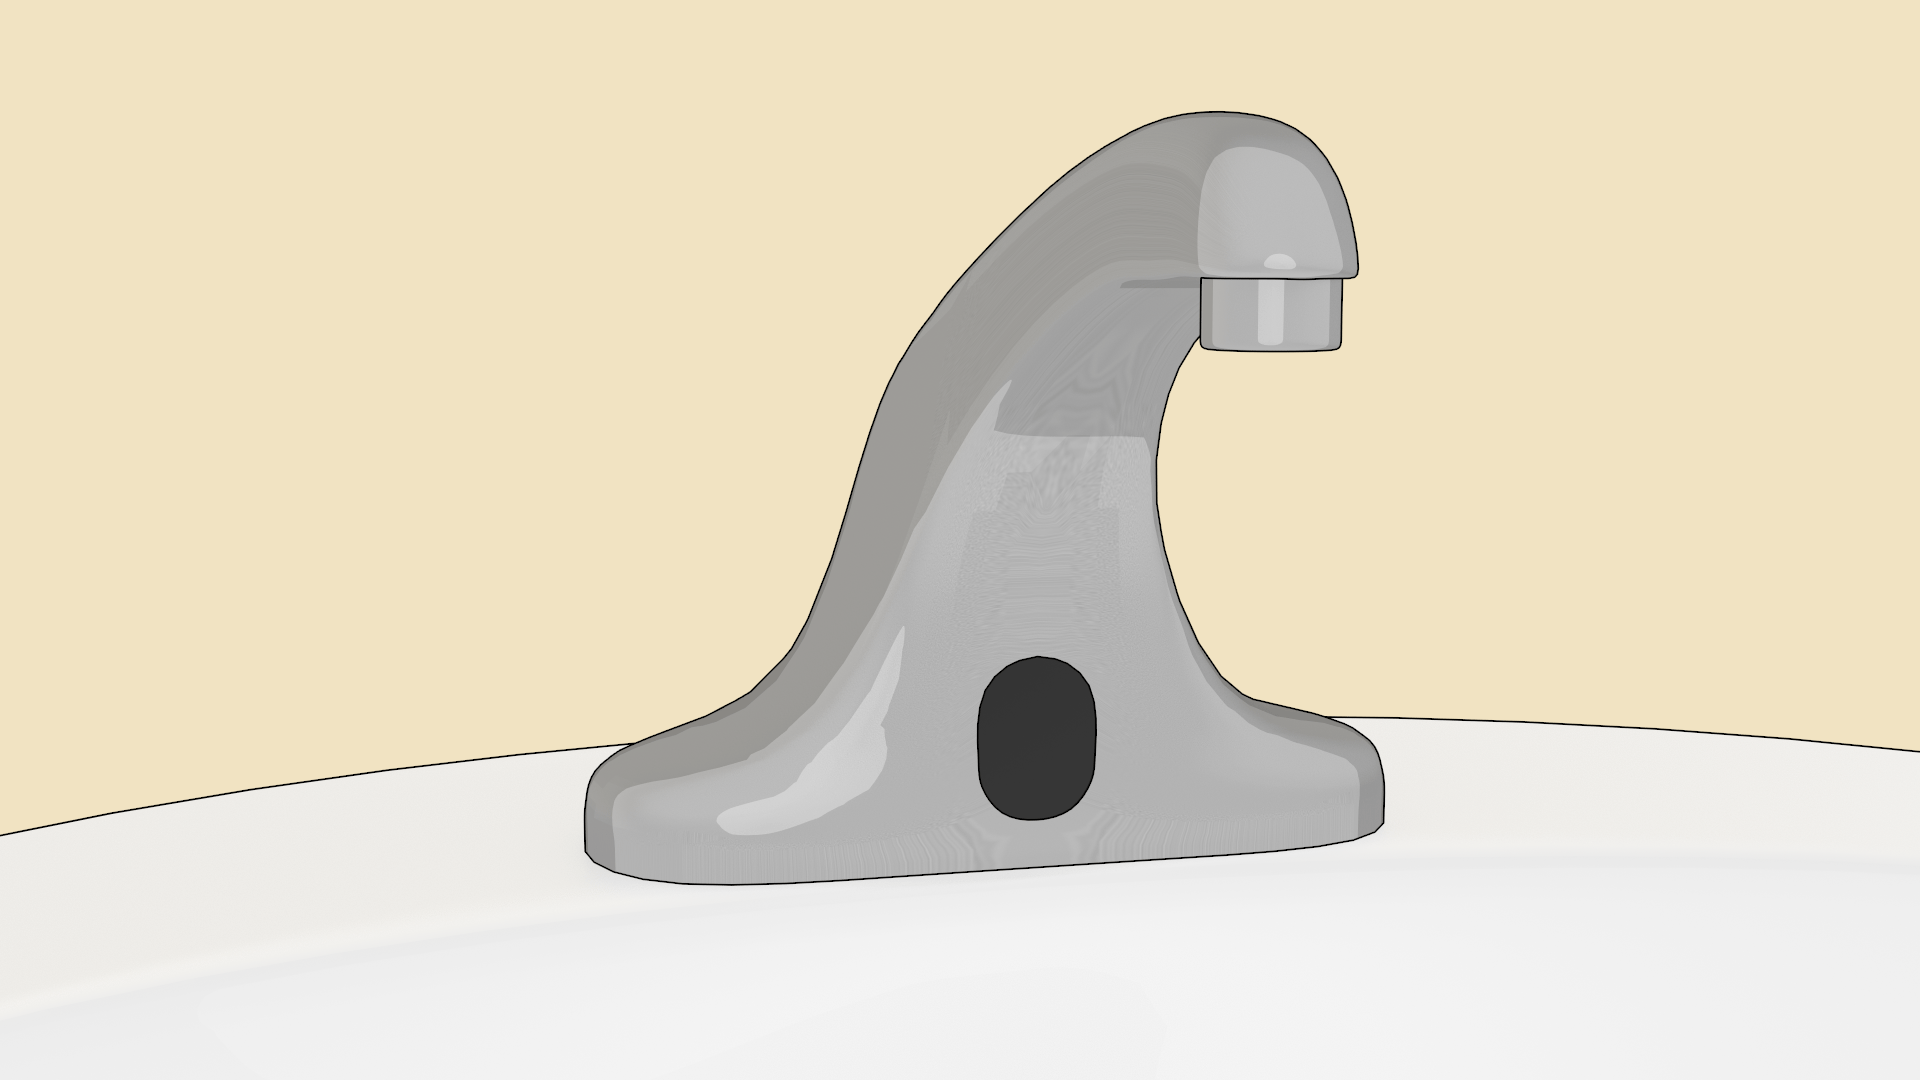 Close-up view of faucet with motion-activated sensor.